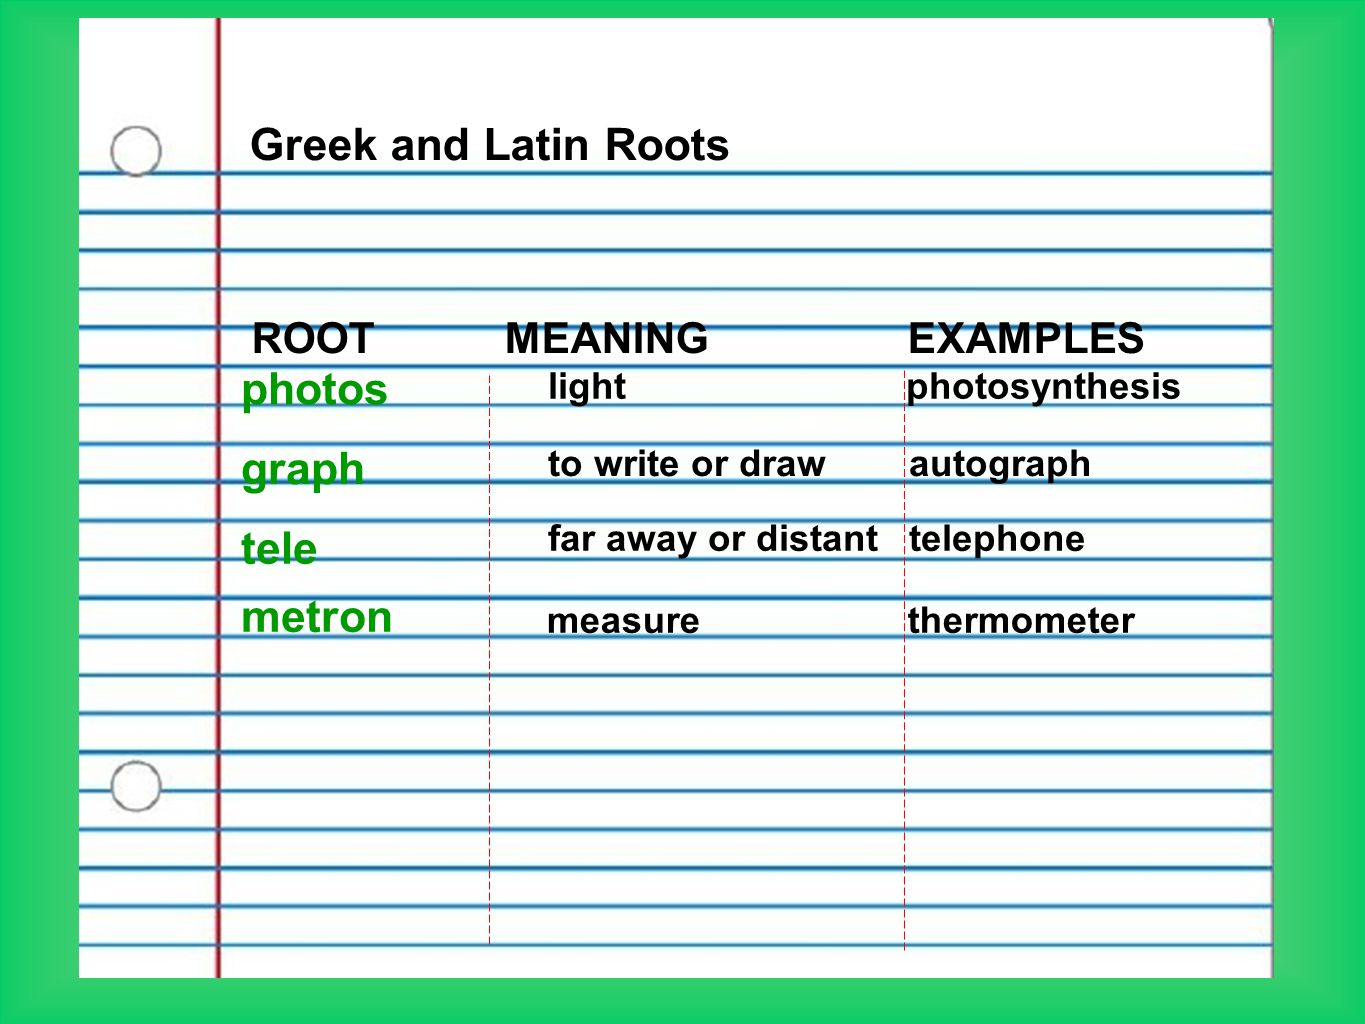 Greek and Latin Roots photos graph tele metron ROOT MEANING EXAMPLES